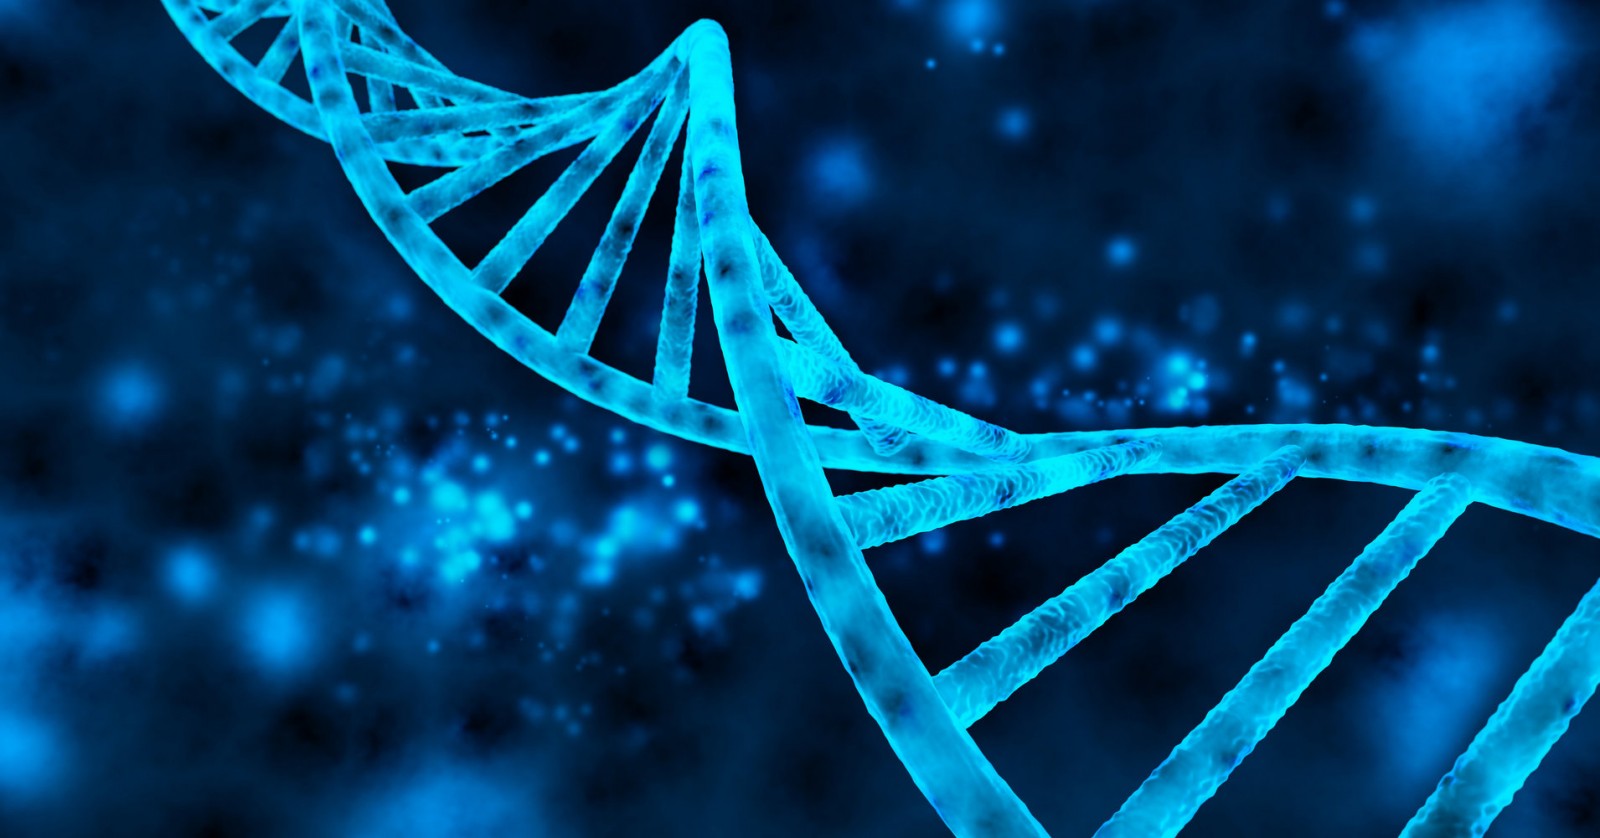 Direct-to-Consumer Genetic Testing: Who Owns Your DNA?